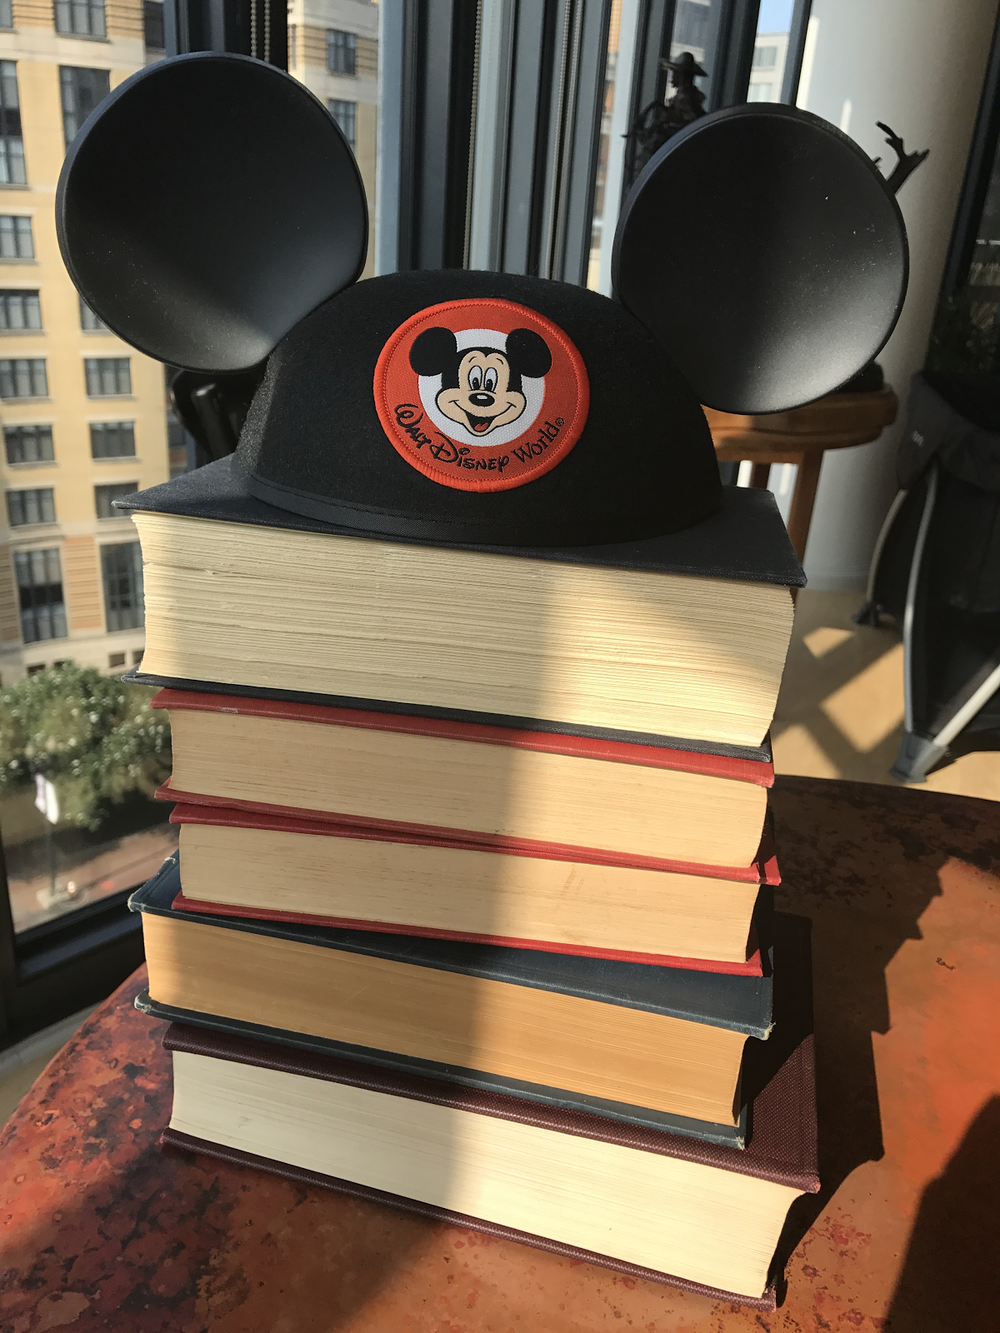  Gift from Gene Ludwig - Compliance isn't Mickey Mouse 